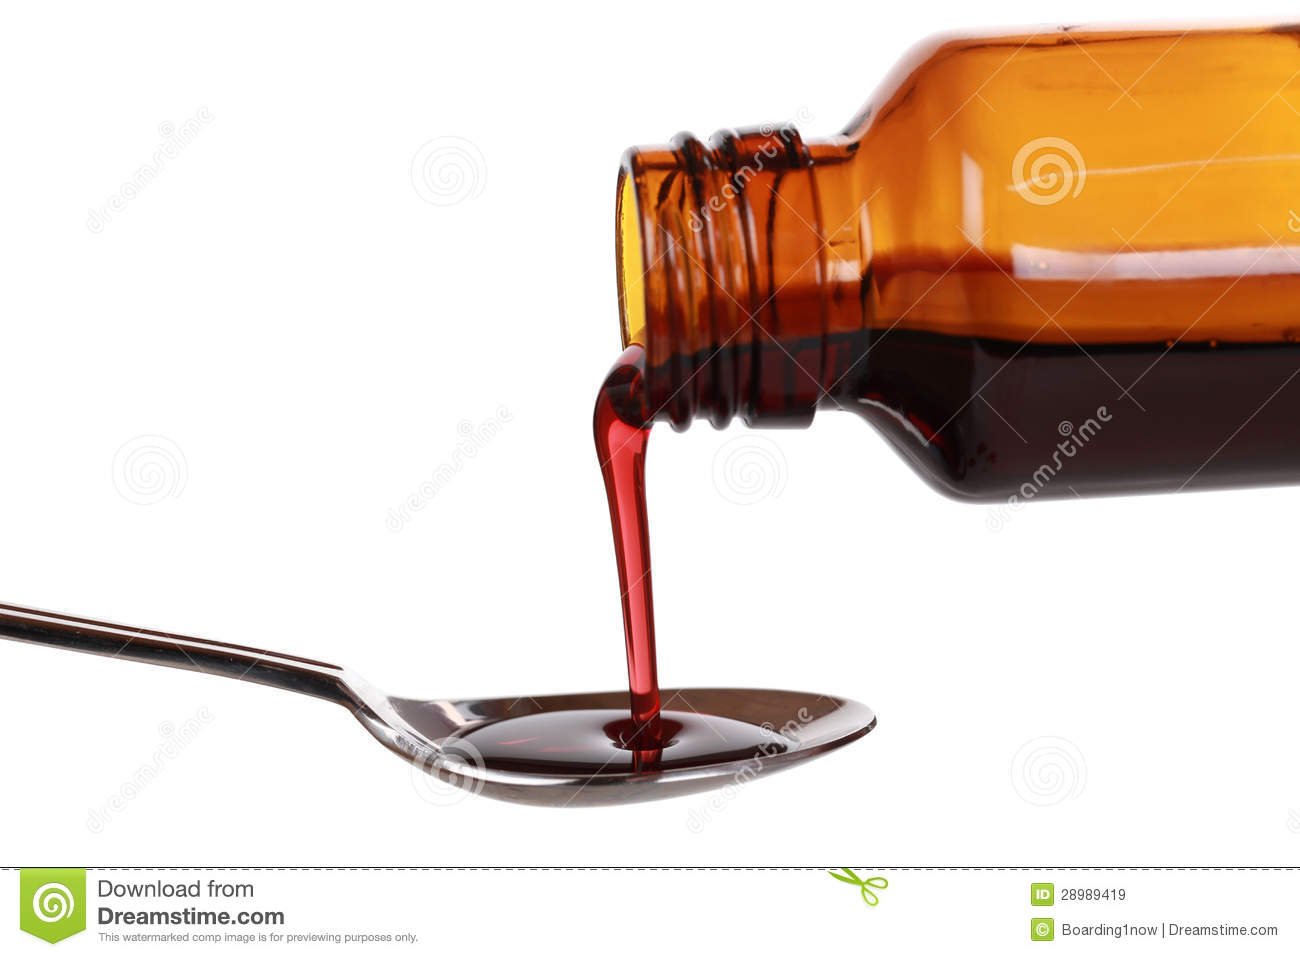 Liquid Medicine In A Bottle Royalty Free Stock Images   Image